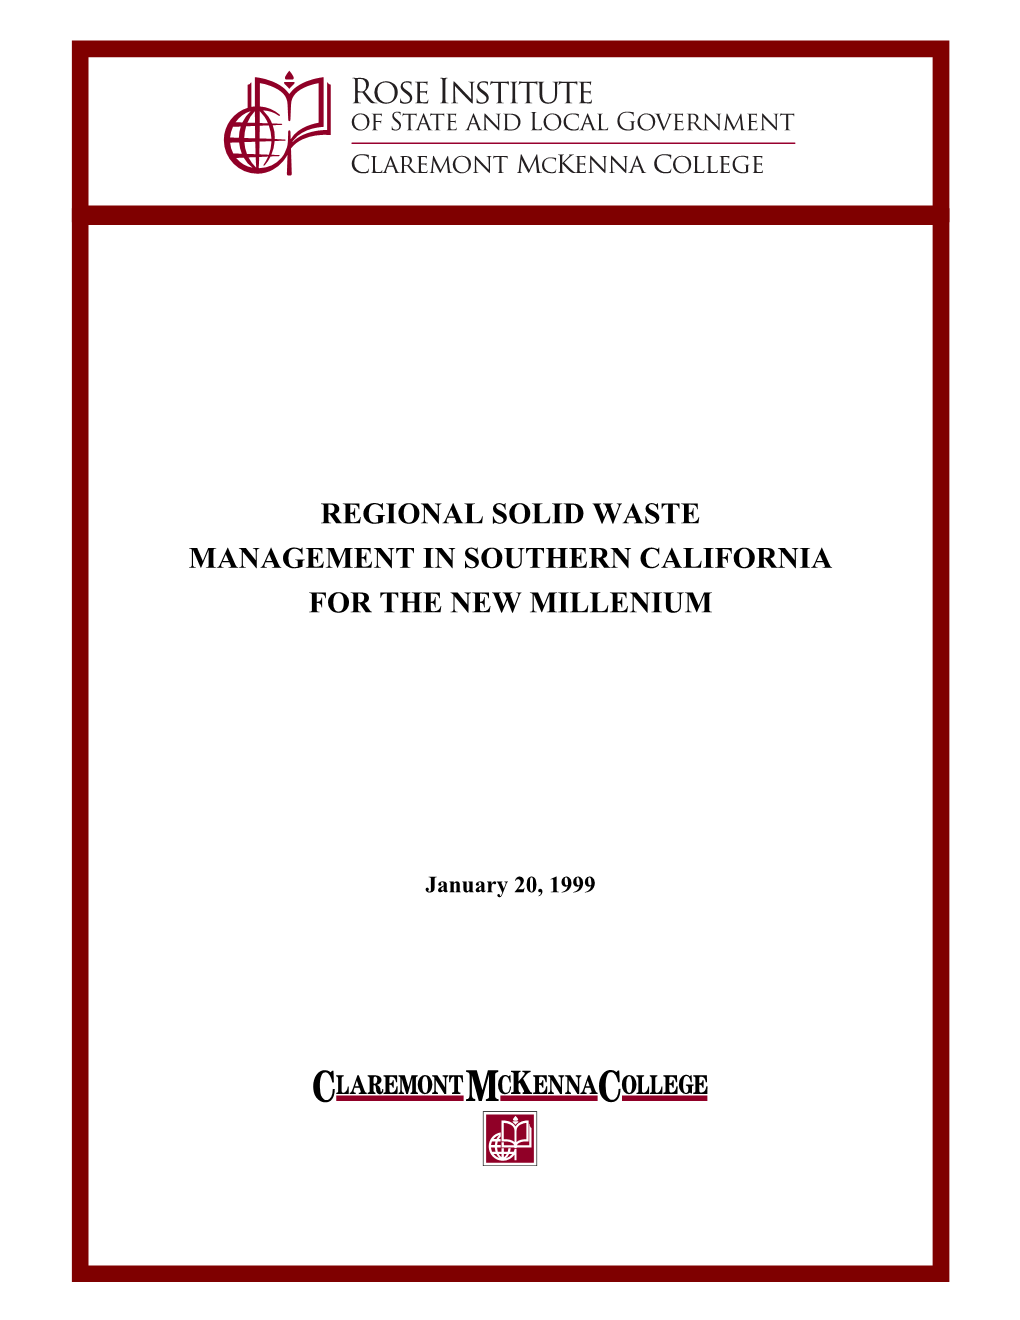 Regional Solid Waste Management in Southern California for the New Millenium